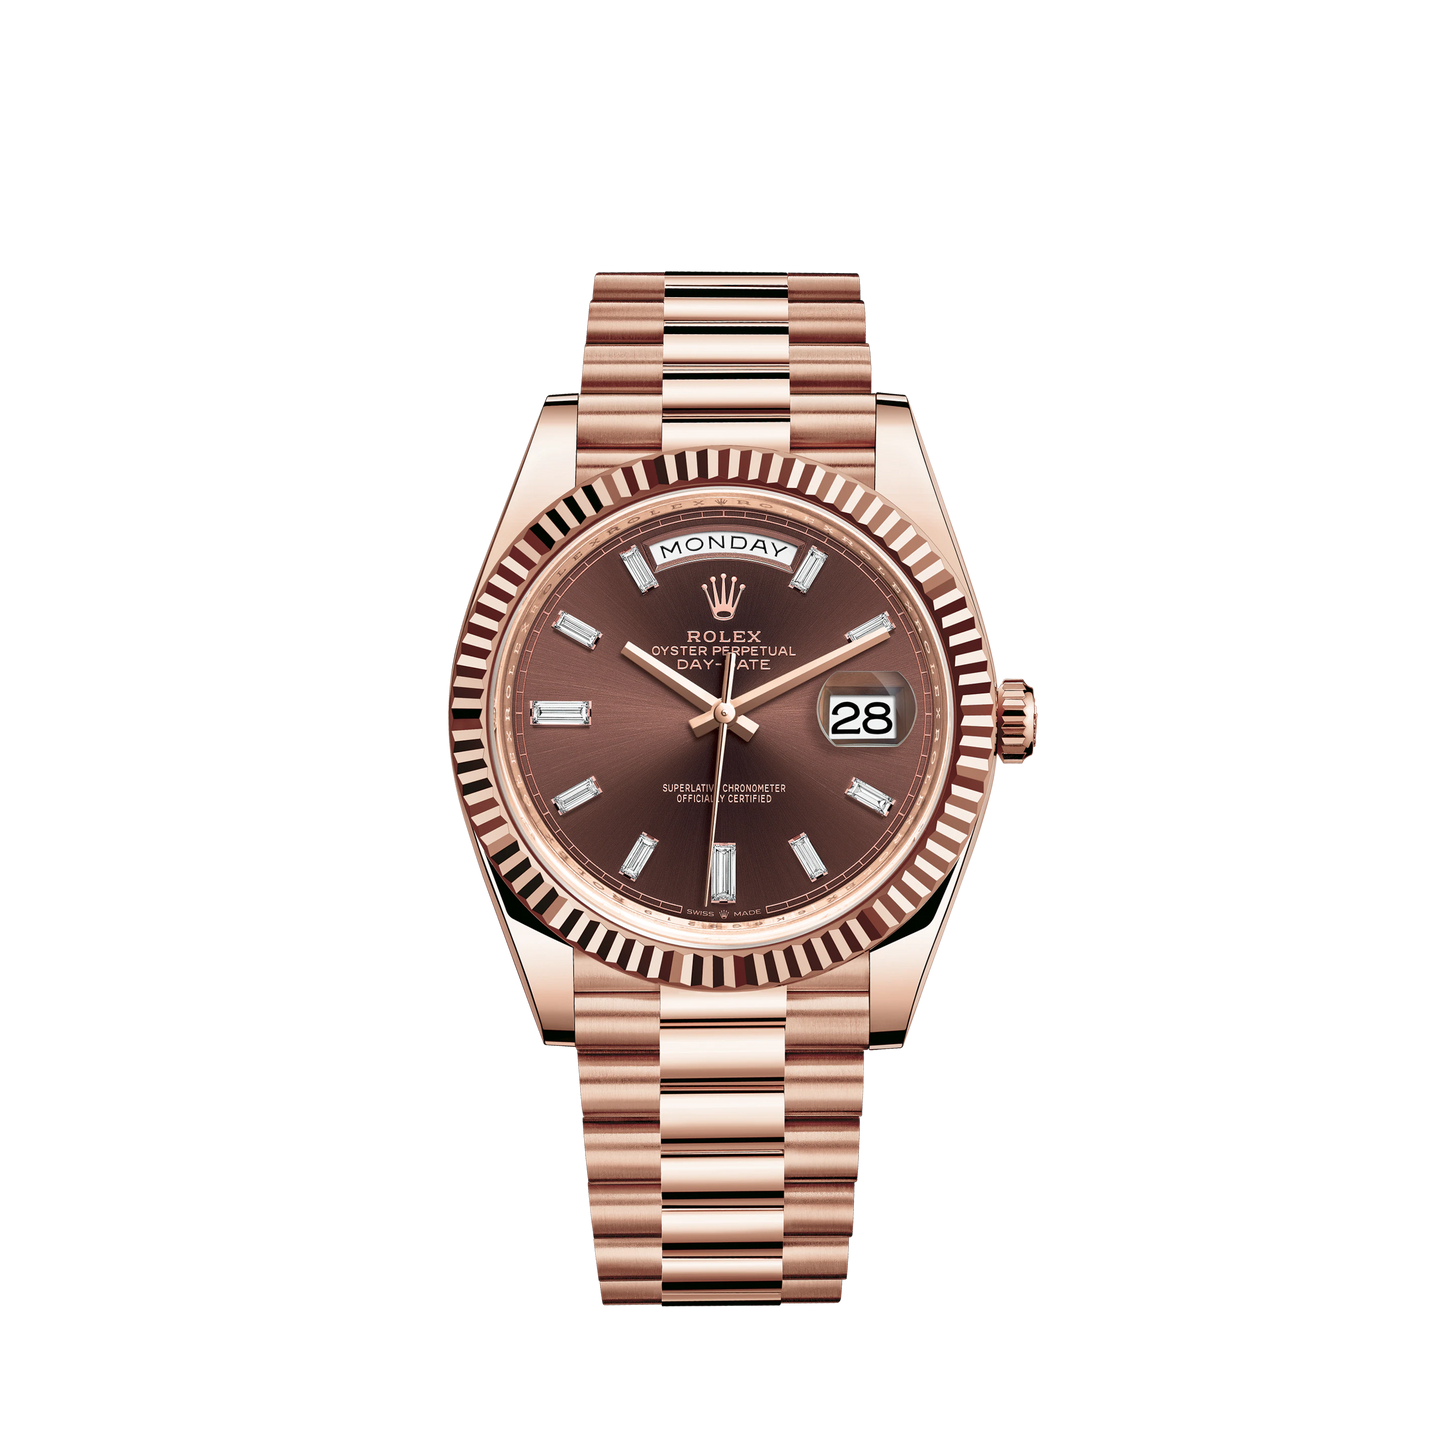 Day-Date 40 40mm President Bracelet and 18 KT Everose Gold with Chocolate Diamond-Set Dial and Fluted Bezel